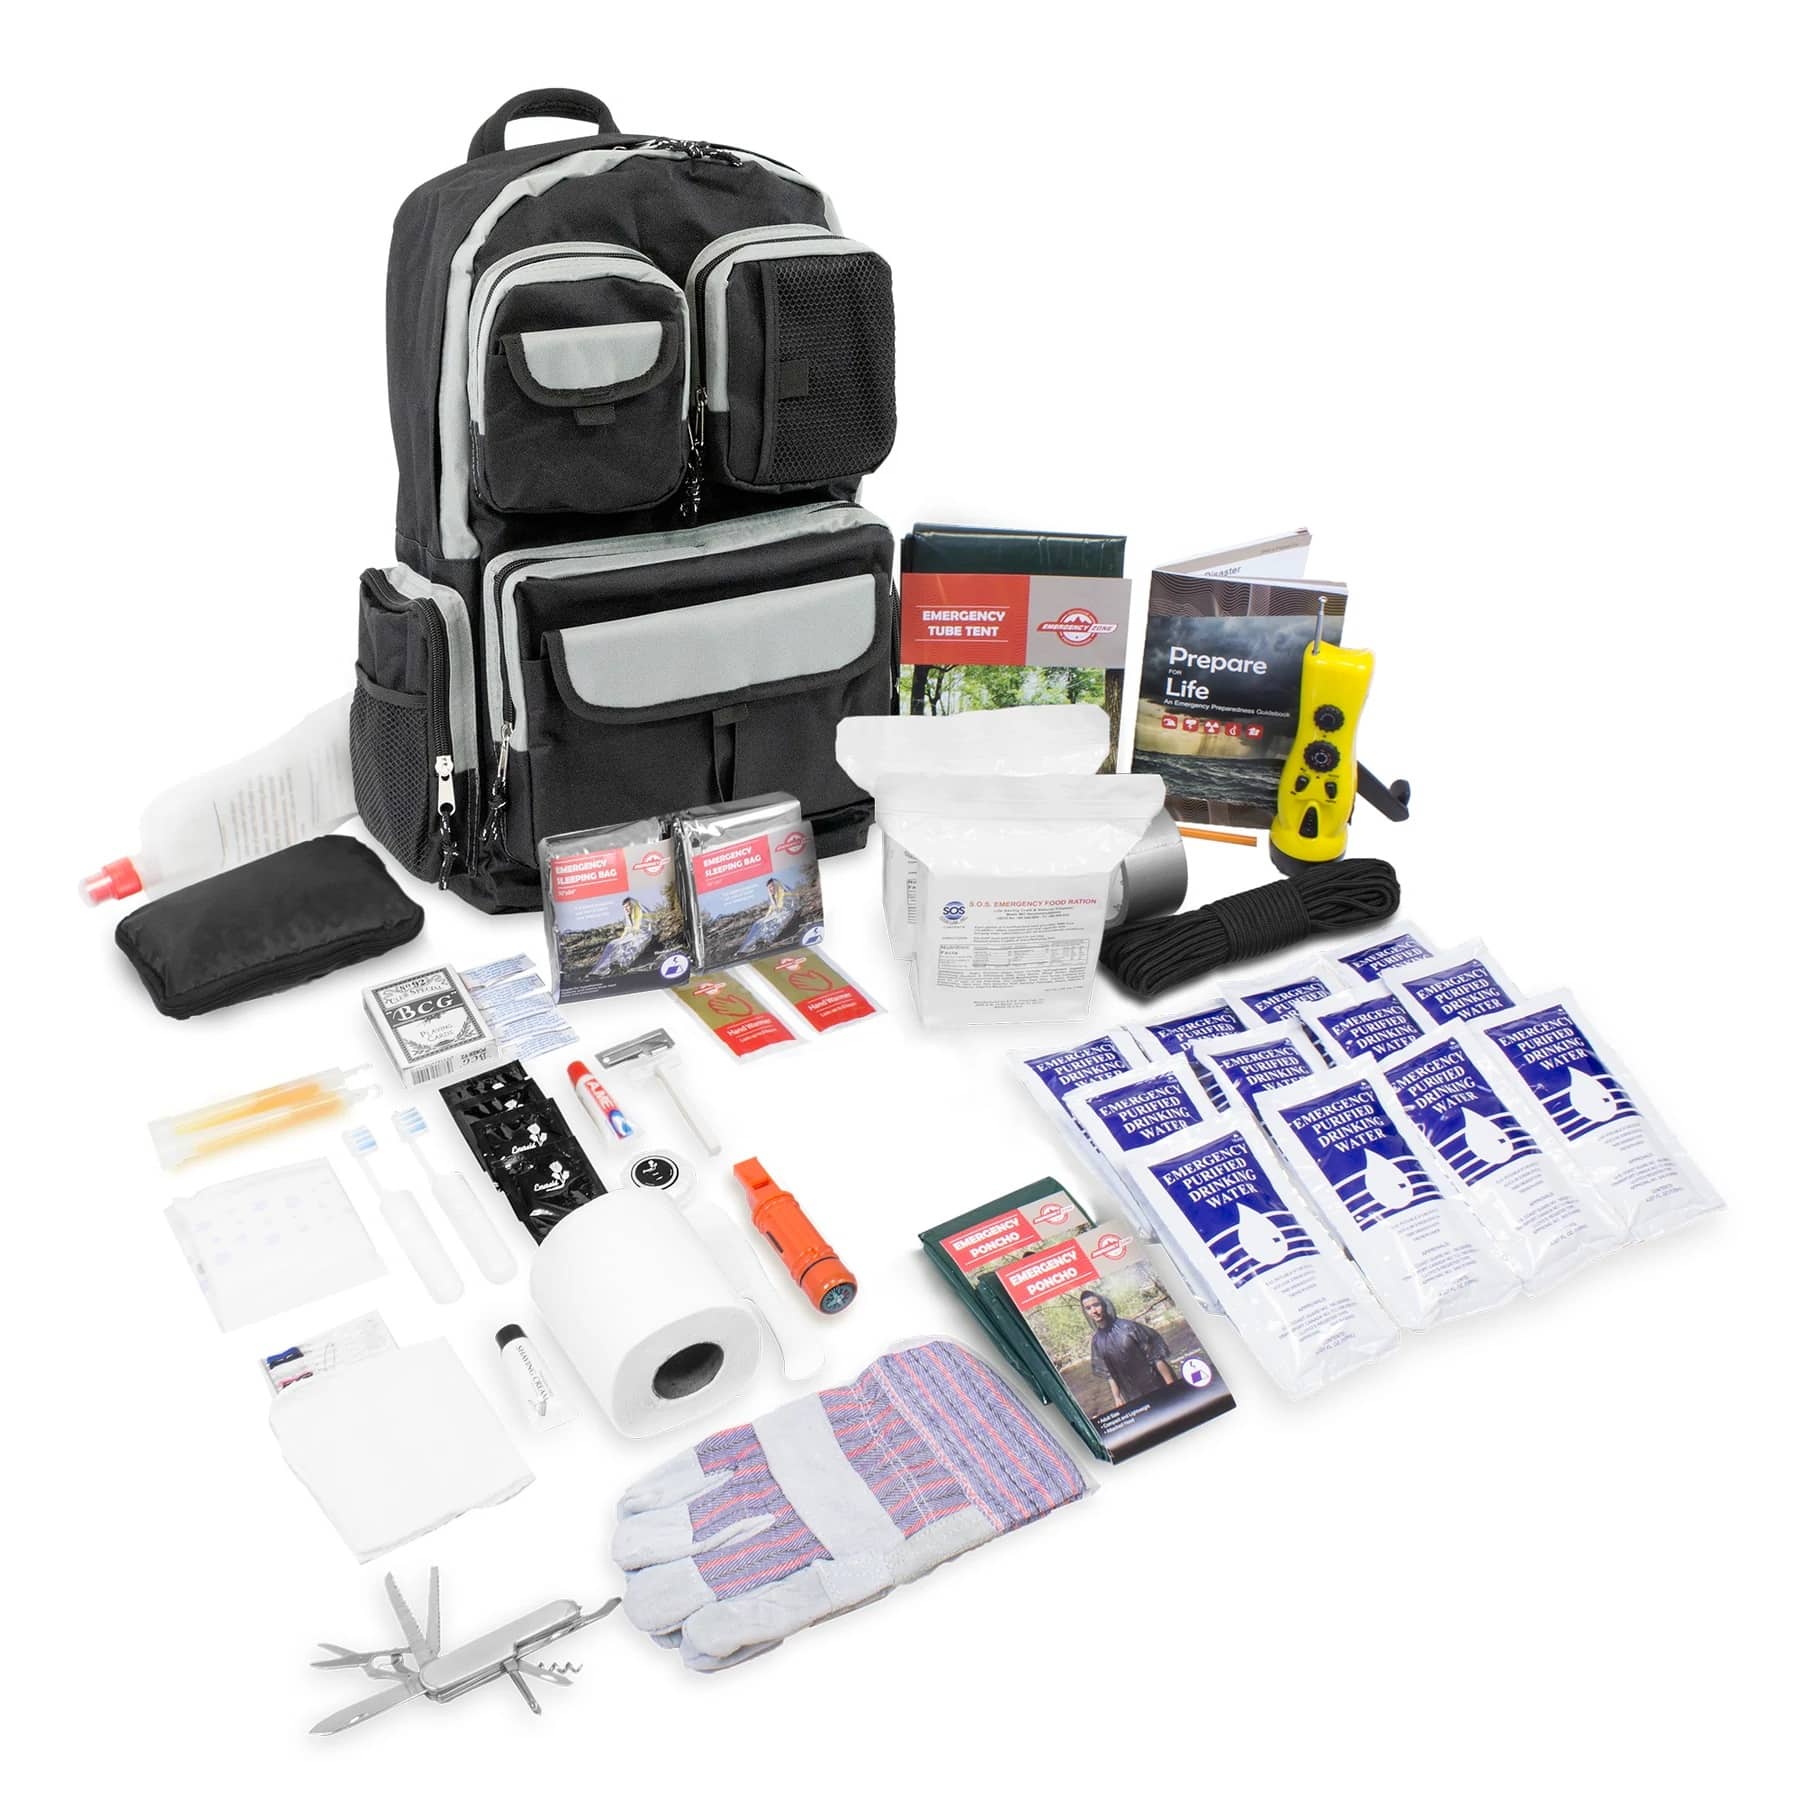 Emergency Zone 840-2 Urban Survival Bug Out Bag Emergency 72 Hour Disaster Kit, 2 Person, Black